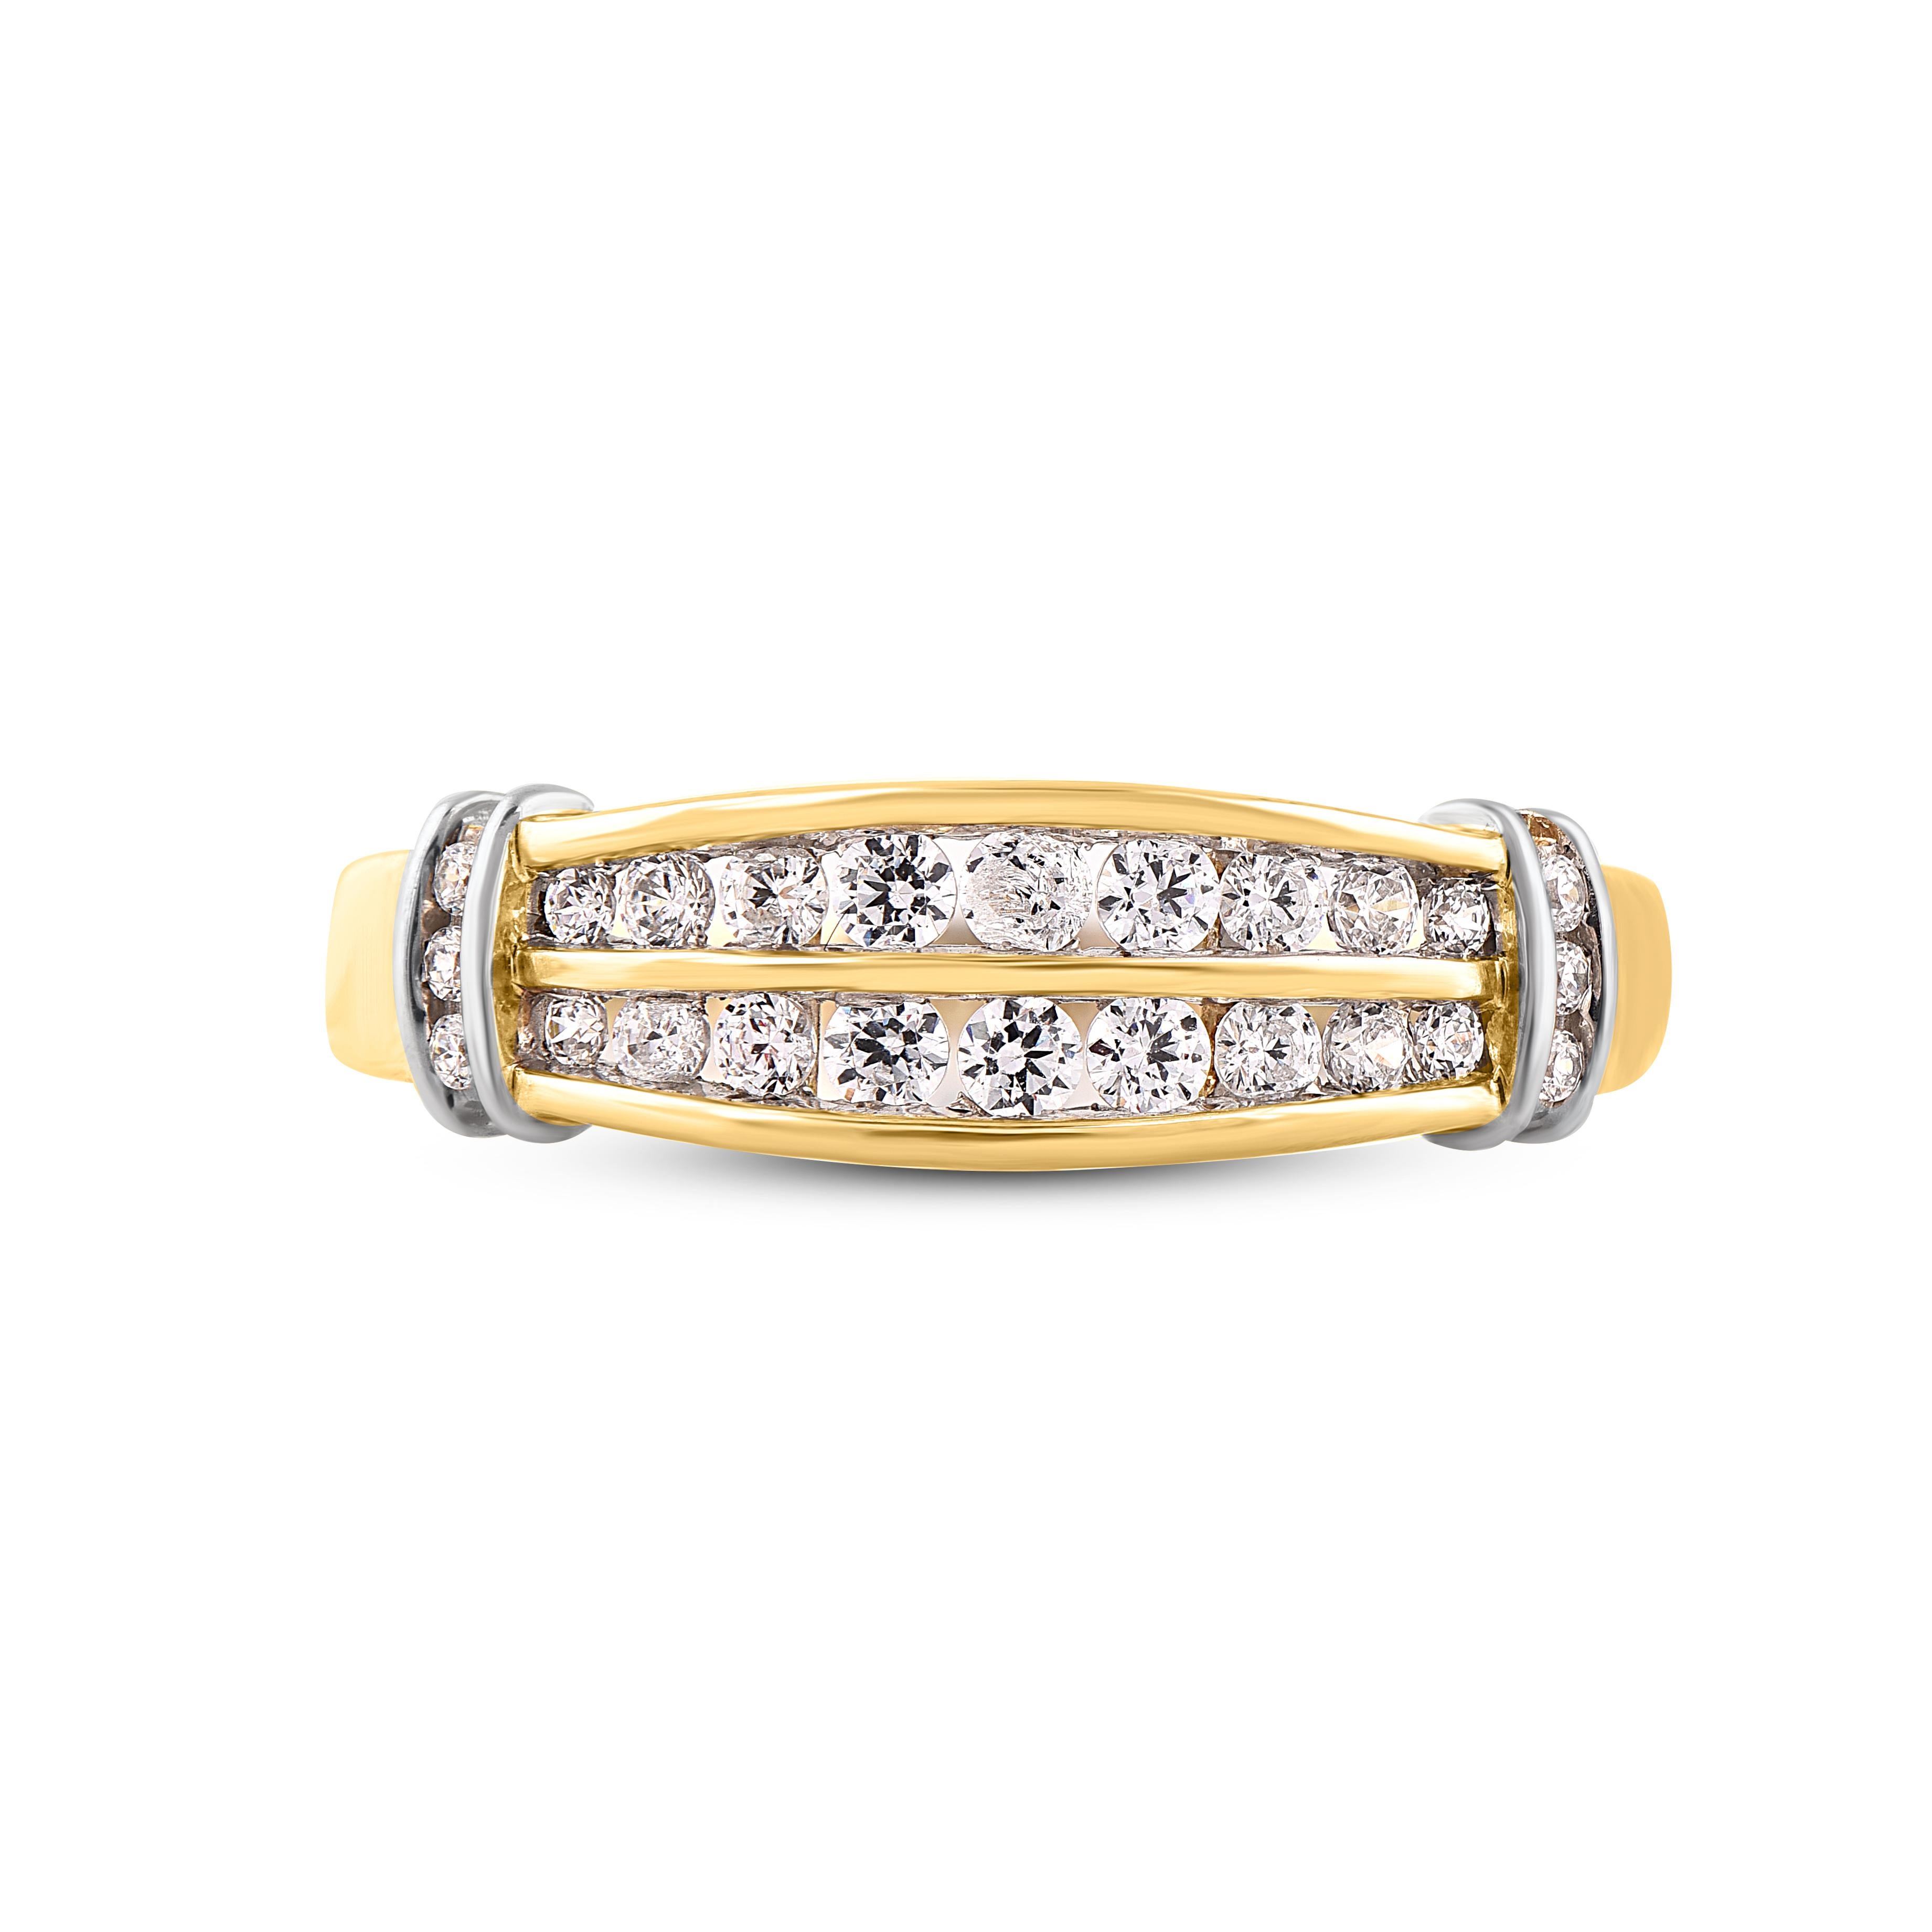 Express your love for her in the most classic way with this band ring. This beautiful ring features shimmering 24 brilliant cut diamonds studded in channel setting. Crafted in 14 karat yellow gold. The total diamond weight is 0.50 carat. The